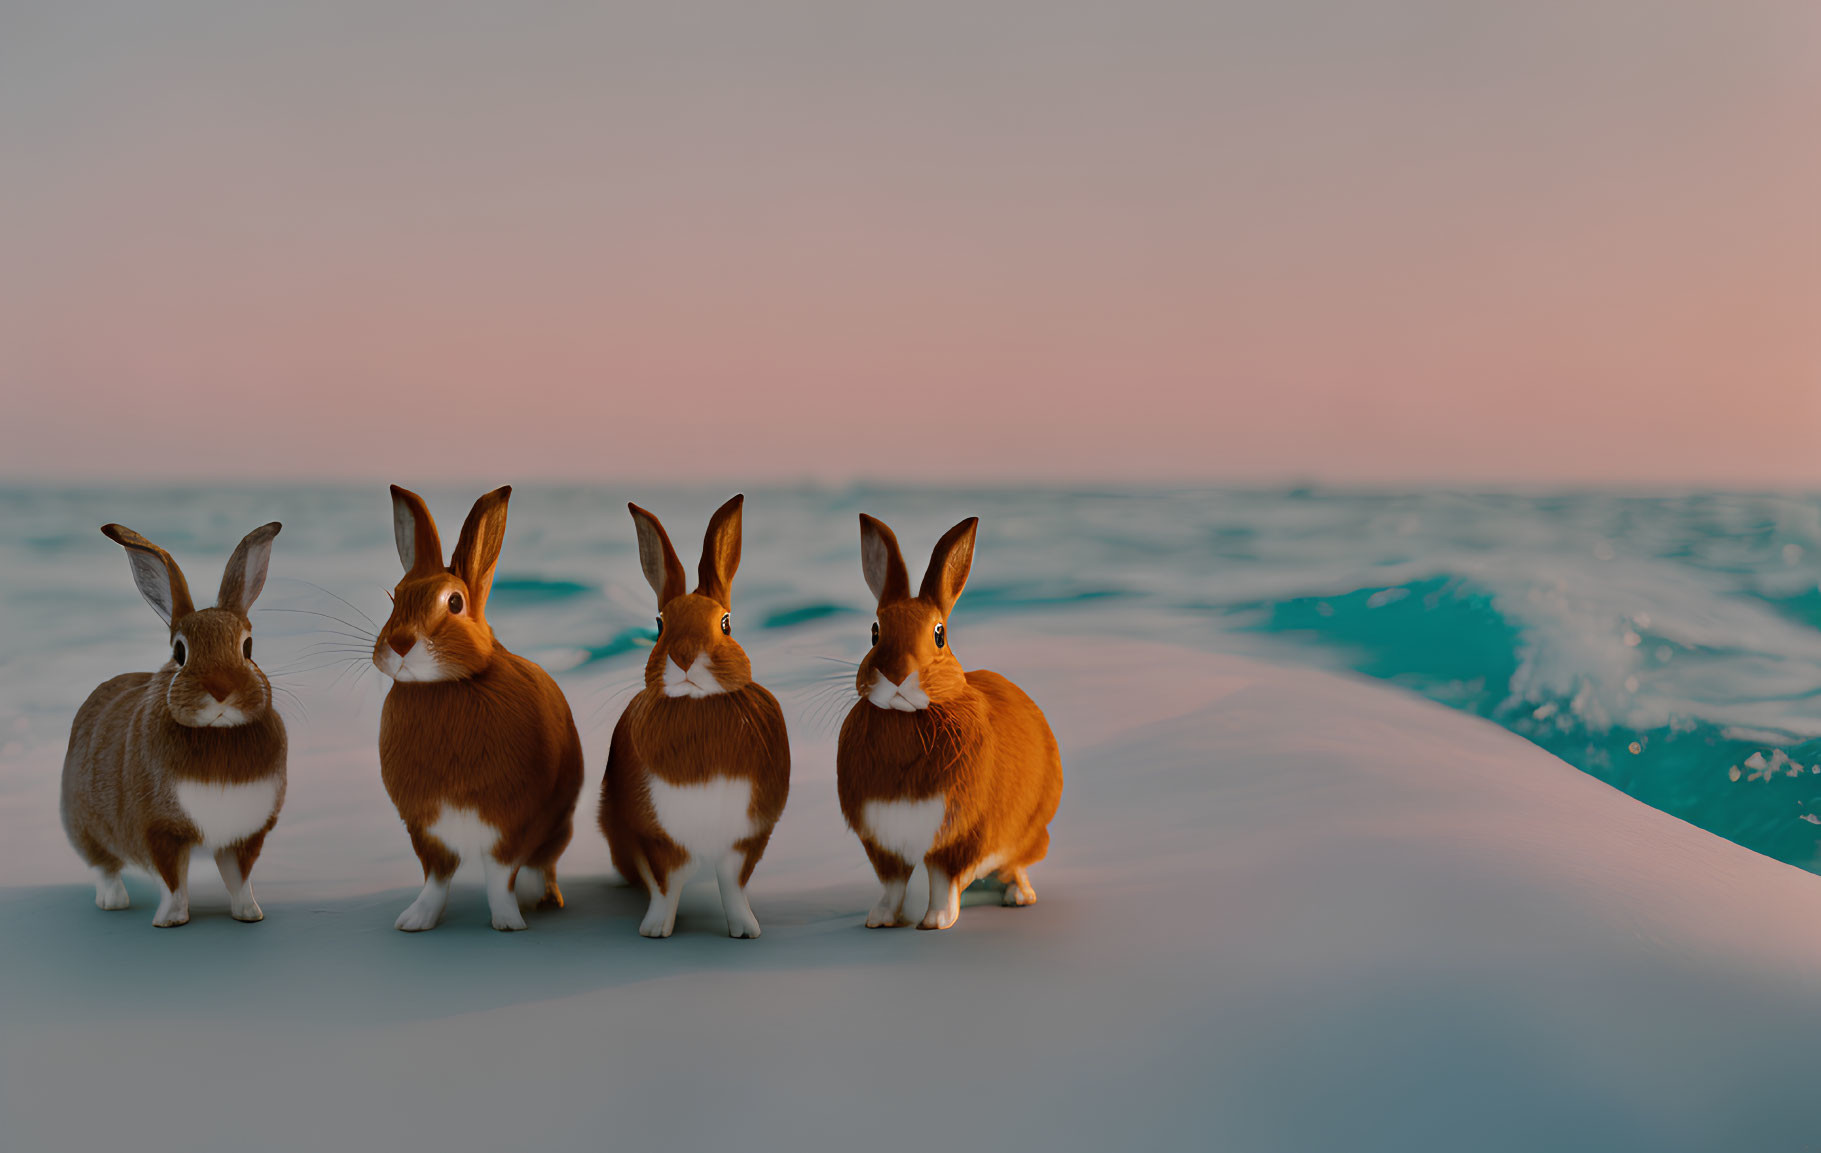 Four rabbits on sandy surface with ocean background at sunrise or sunset